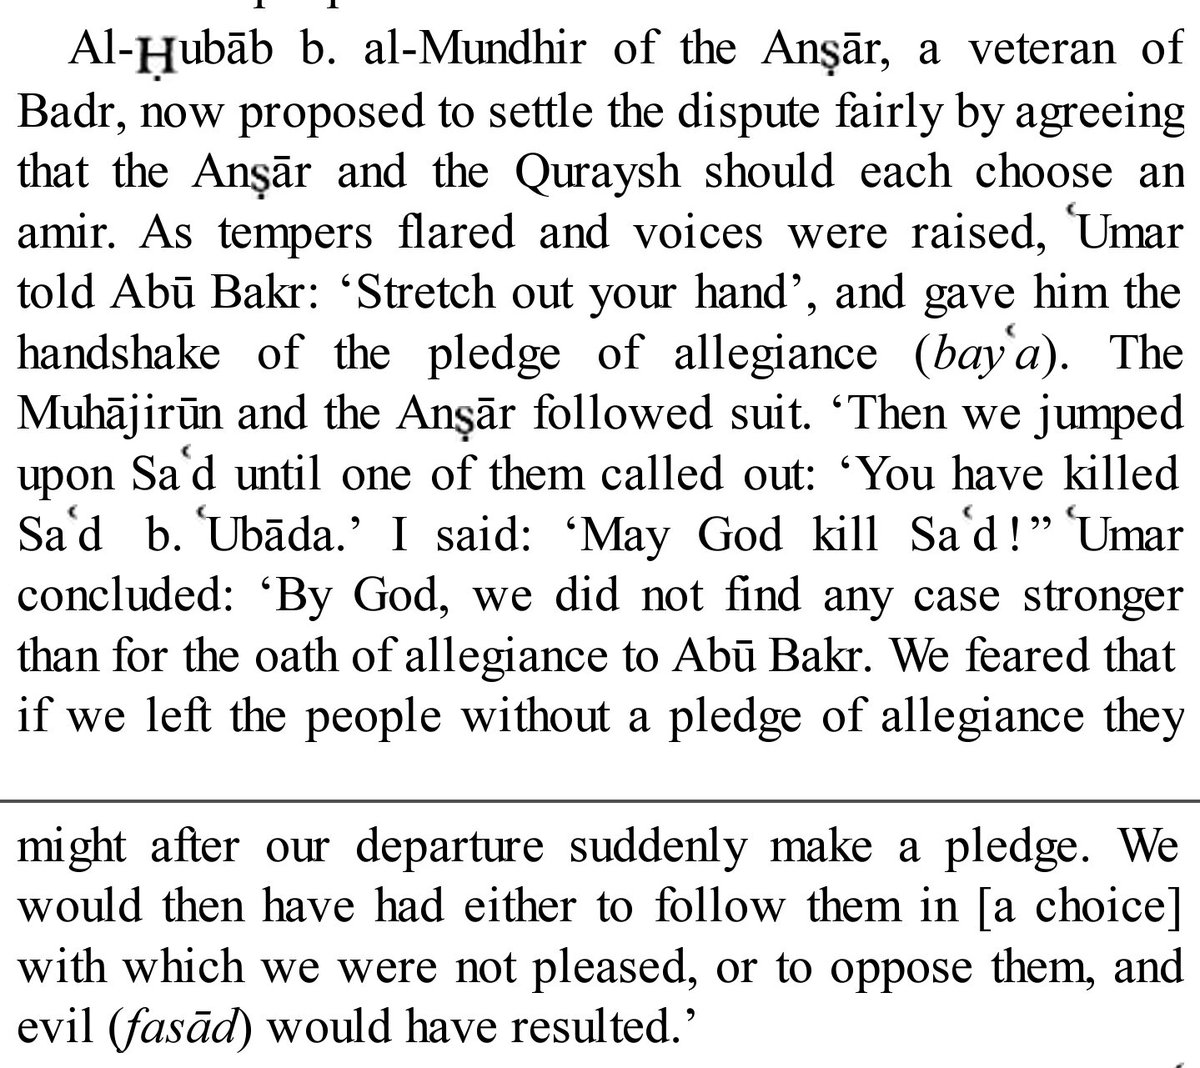 First of all, these old men jumped on a sickly Sahabi until he died?Secondly, Umar was scared that the Ansar would do to them what the two of them did to the Caliph of Allah, Imam Ali ibn Abi Talib (AS). The hypocrisy reeks.